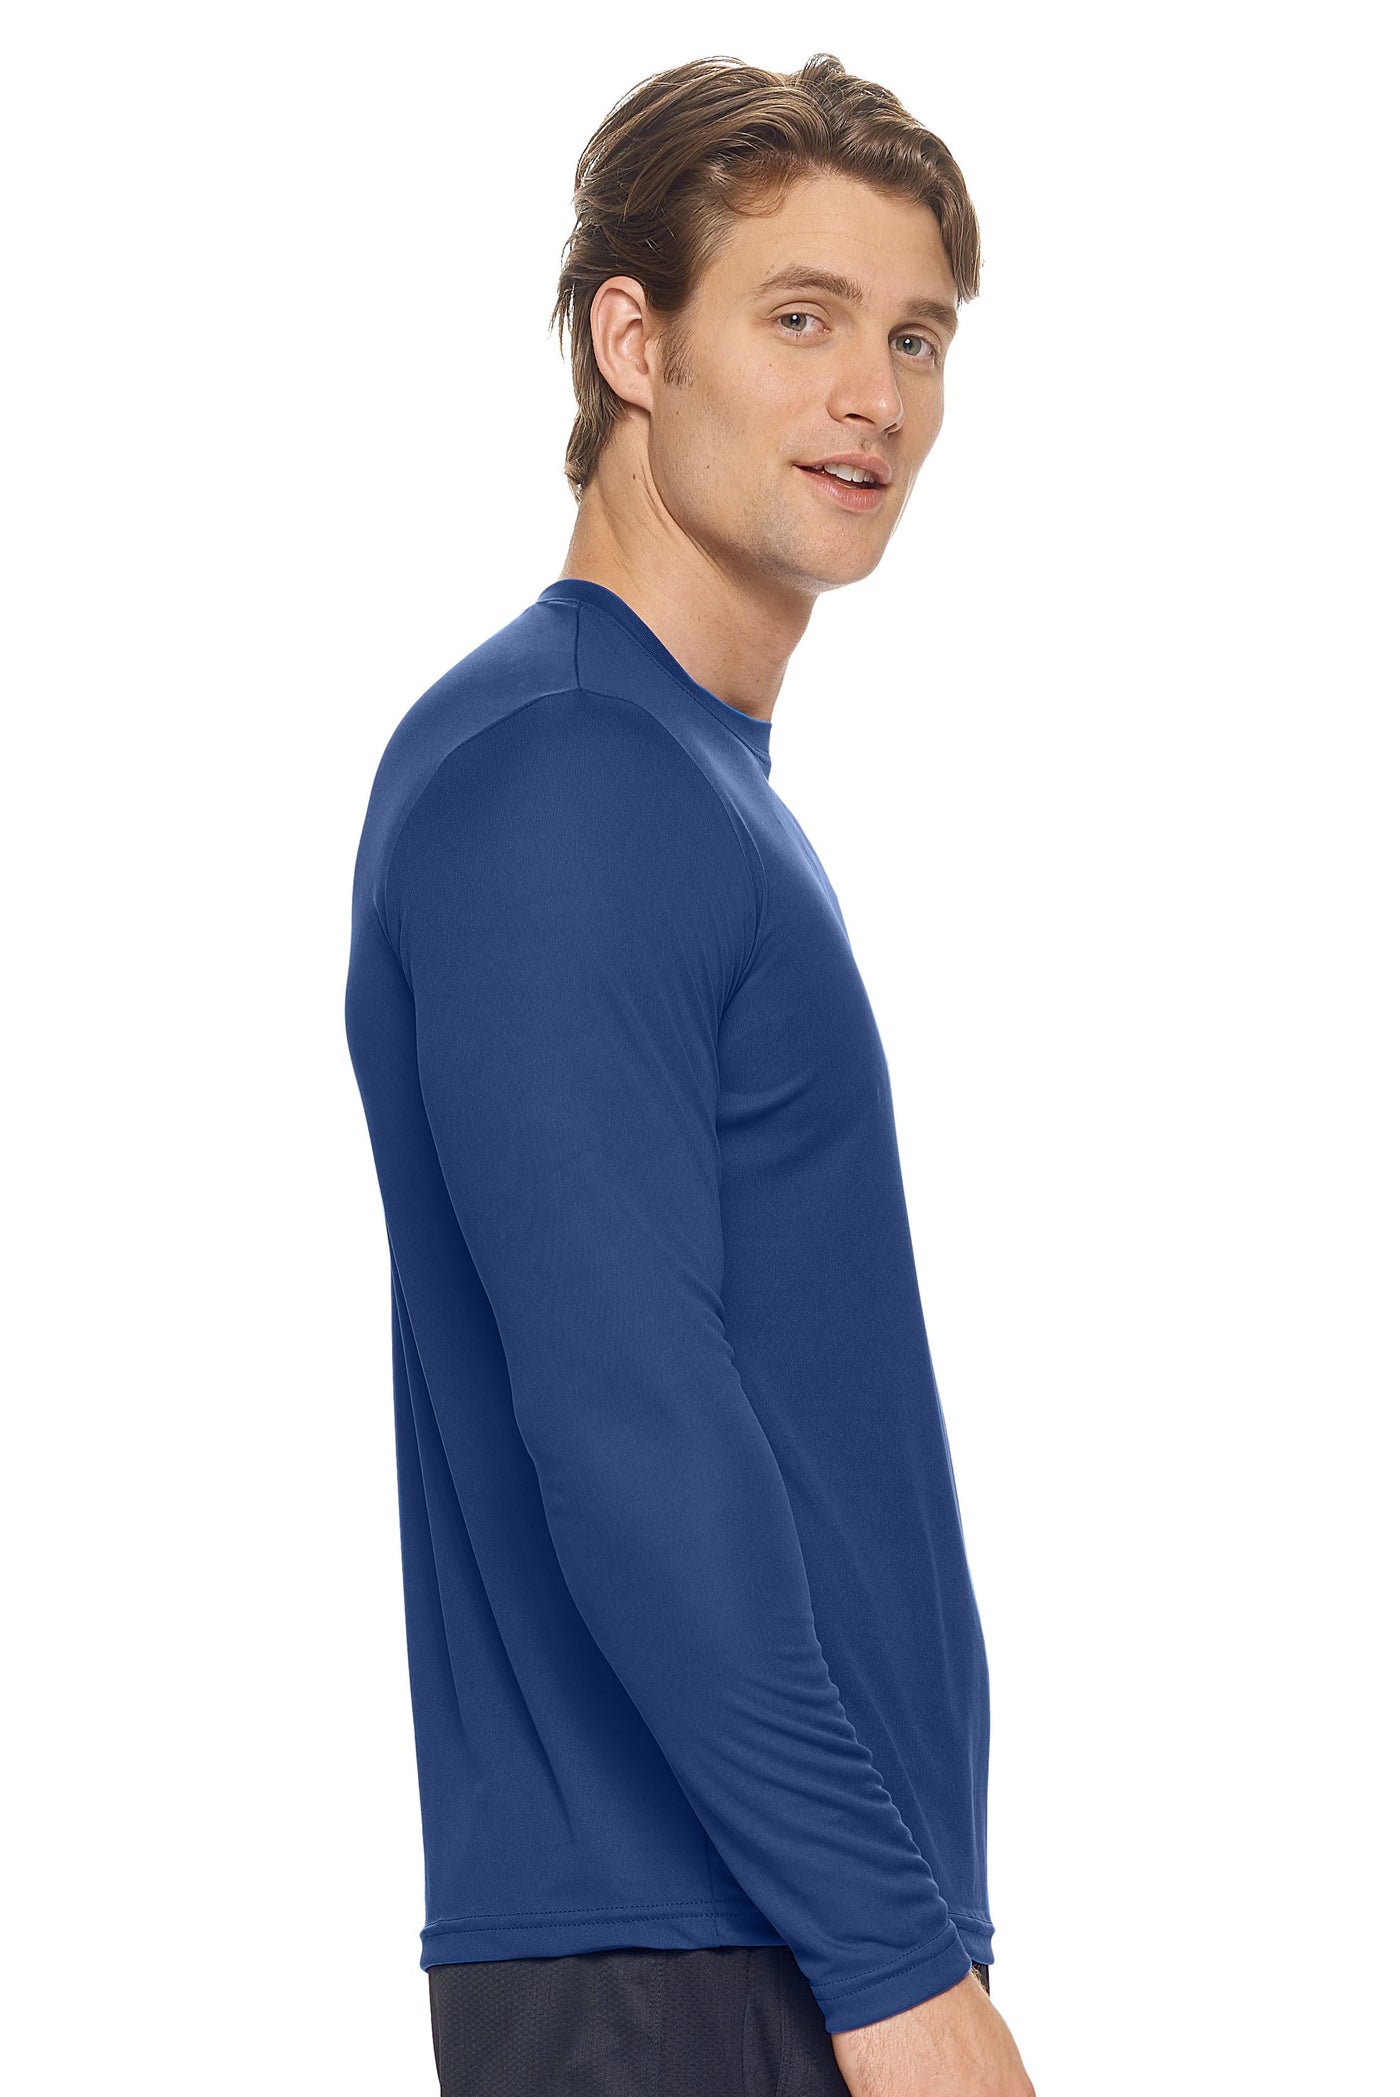 Expert Brand Retail Activewear Men's Sportswear Performance Fitness Crewneck Long Sleeve Tec Shirt Made in USA in navy 2#color_navy